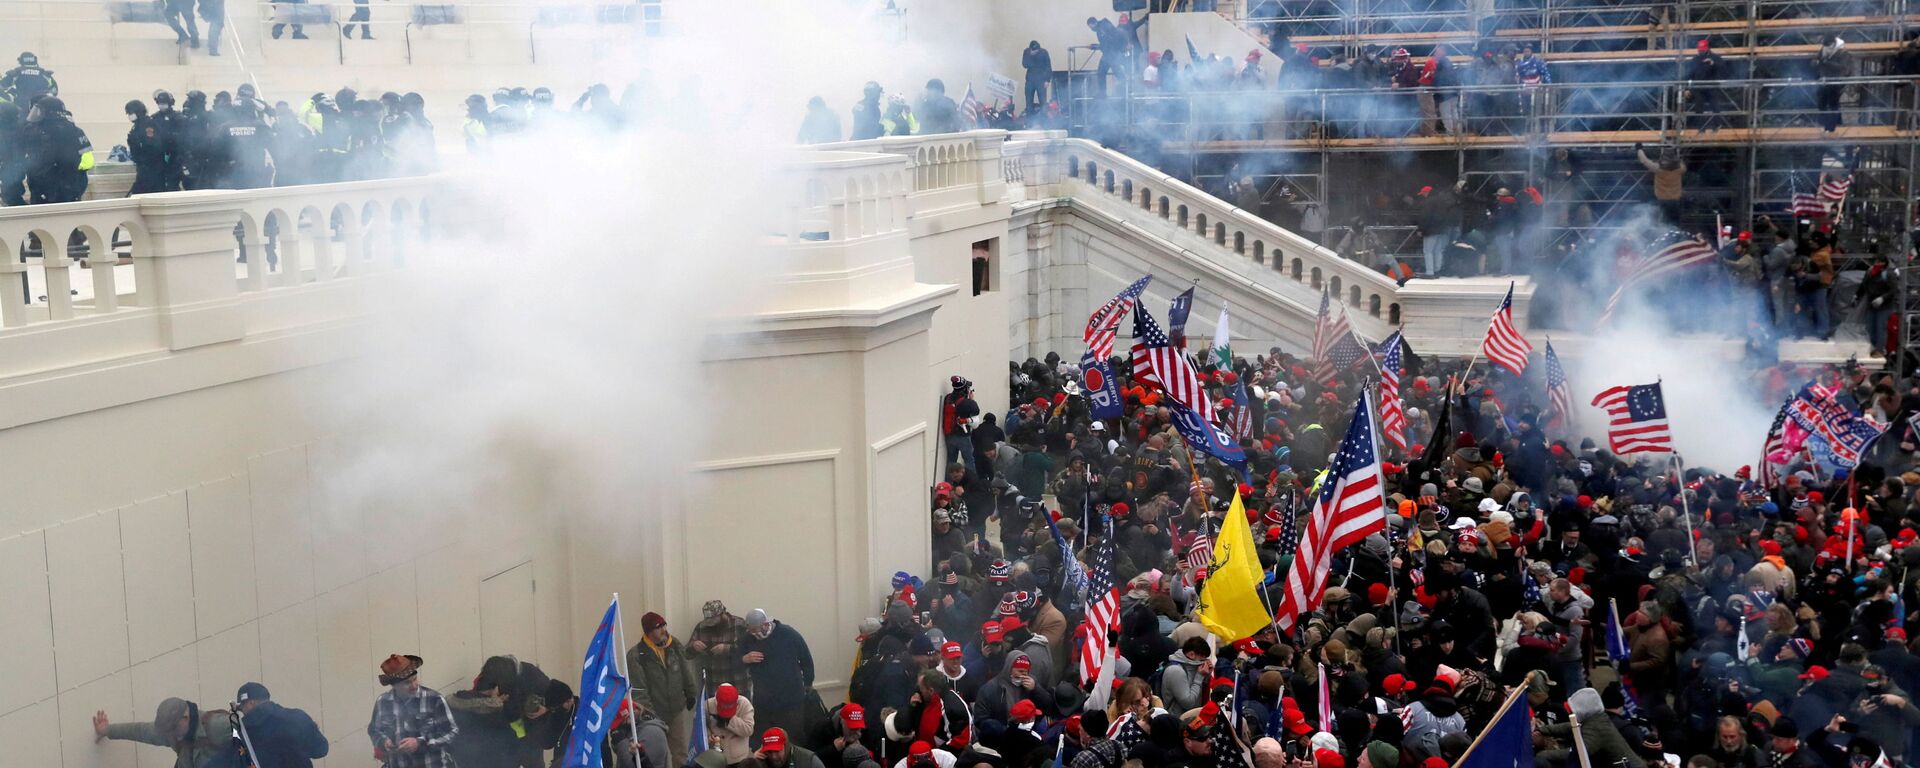 Police release tear gas into a crowd of pro-Trump protesters during clashes at a rally to contest the certification of the 2020 U.S. presidential election results by the U.S. Congress, at the U.S. Capitol Building in Washington, U.S, January 6, 2021. - Sputnik International, 1920, 09.11.2021